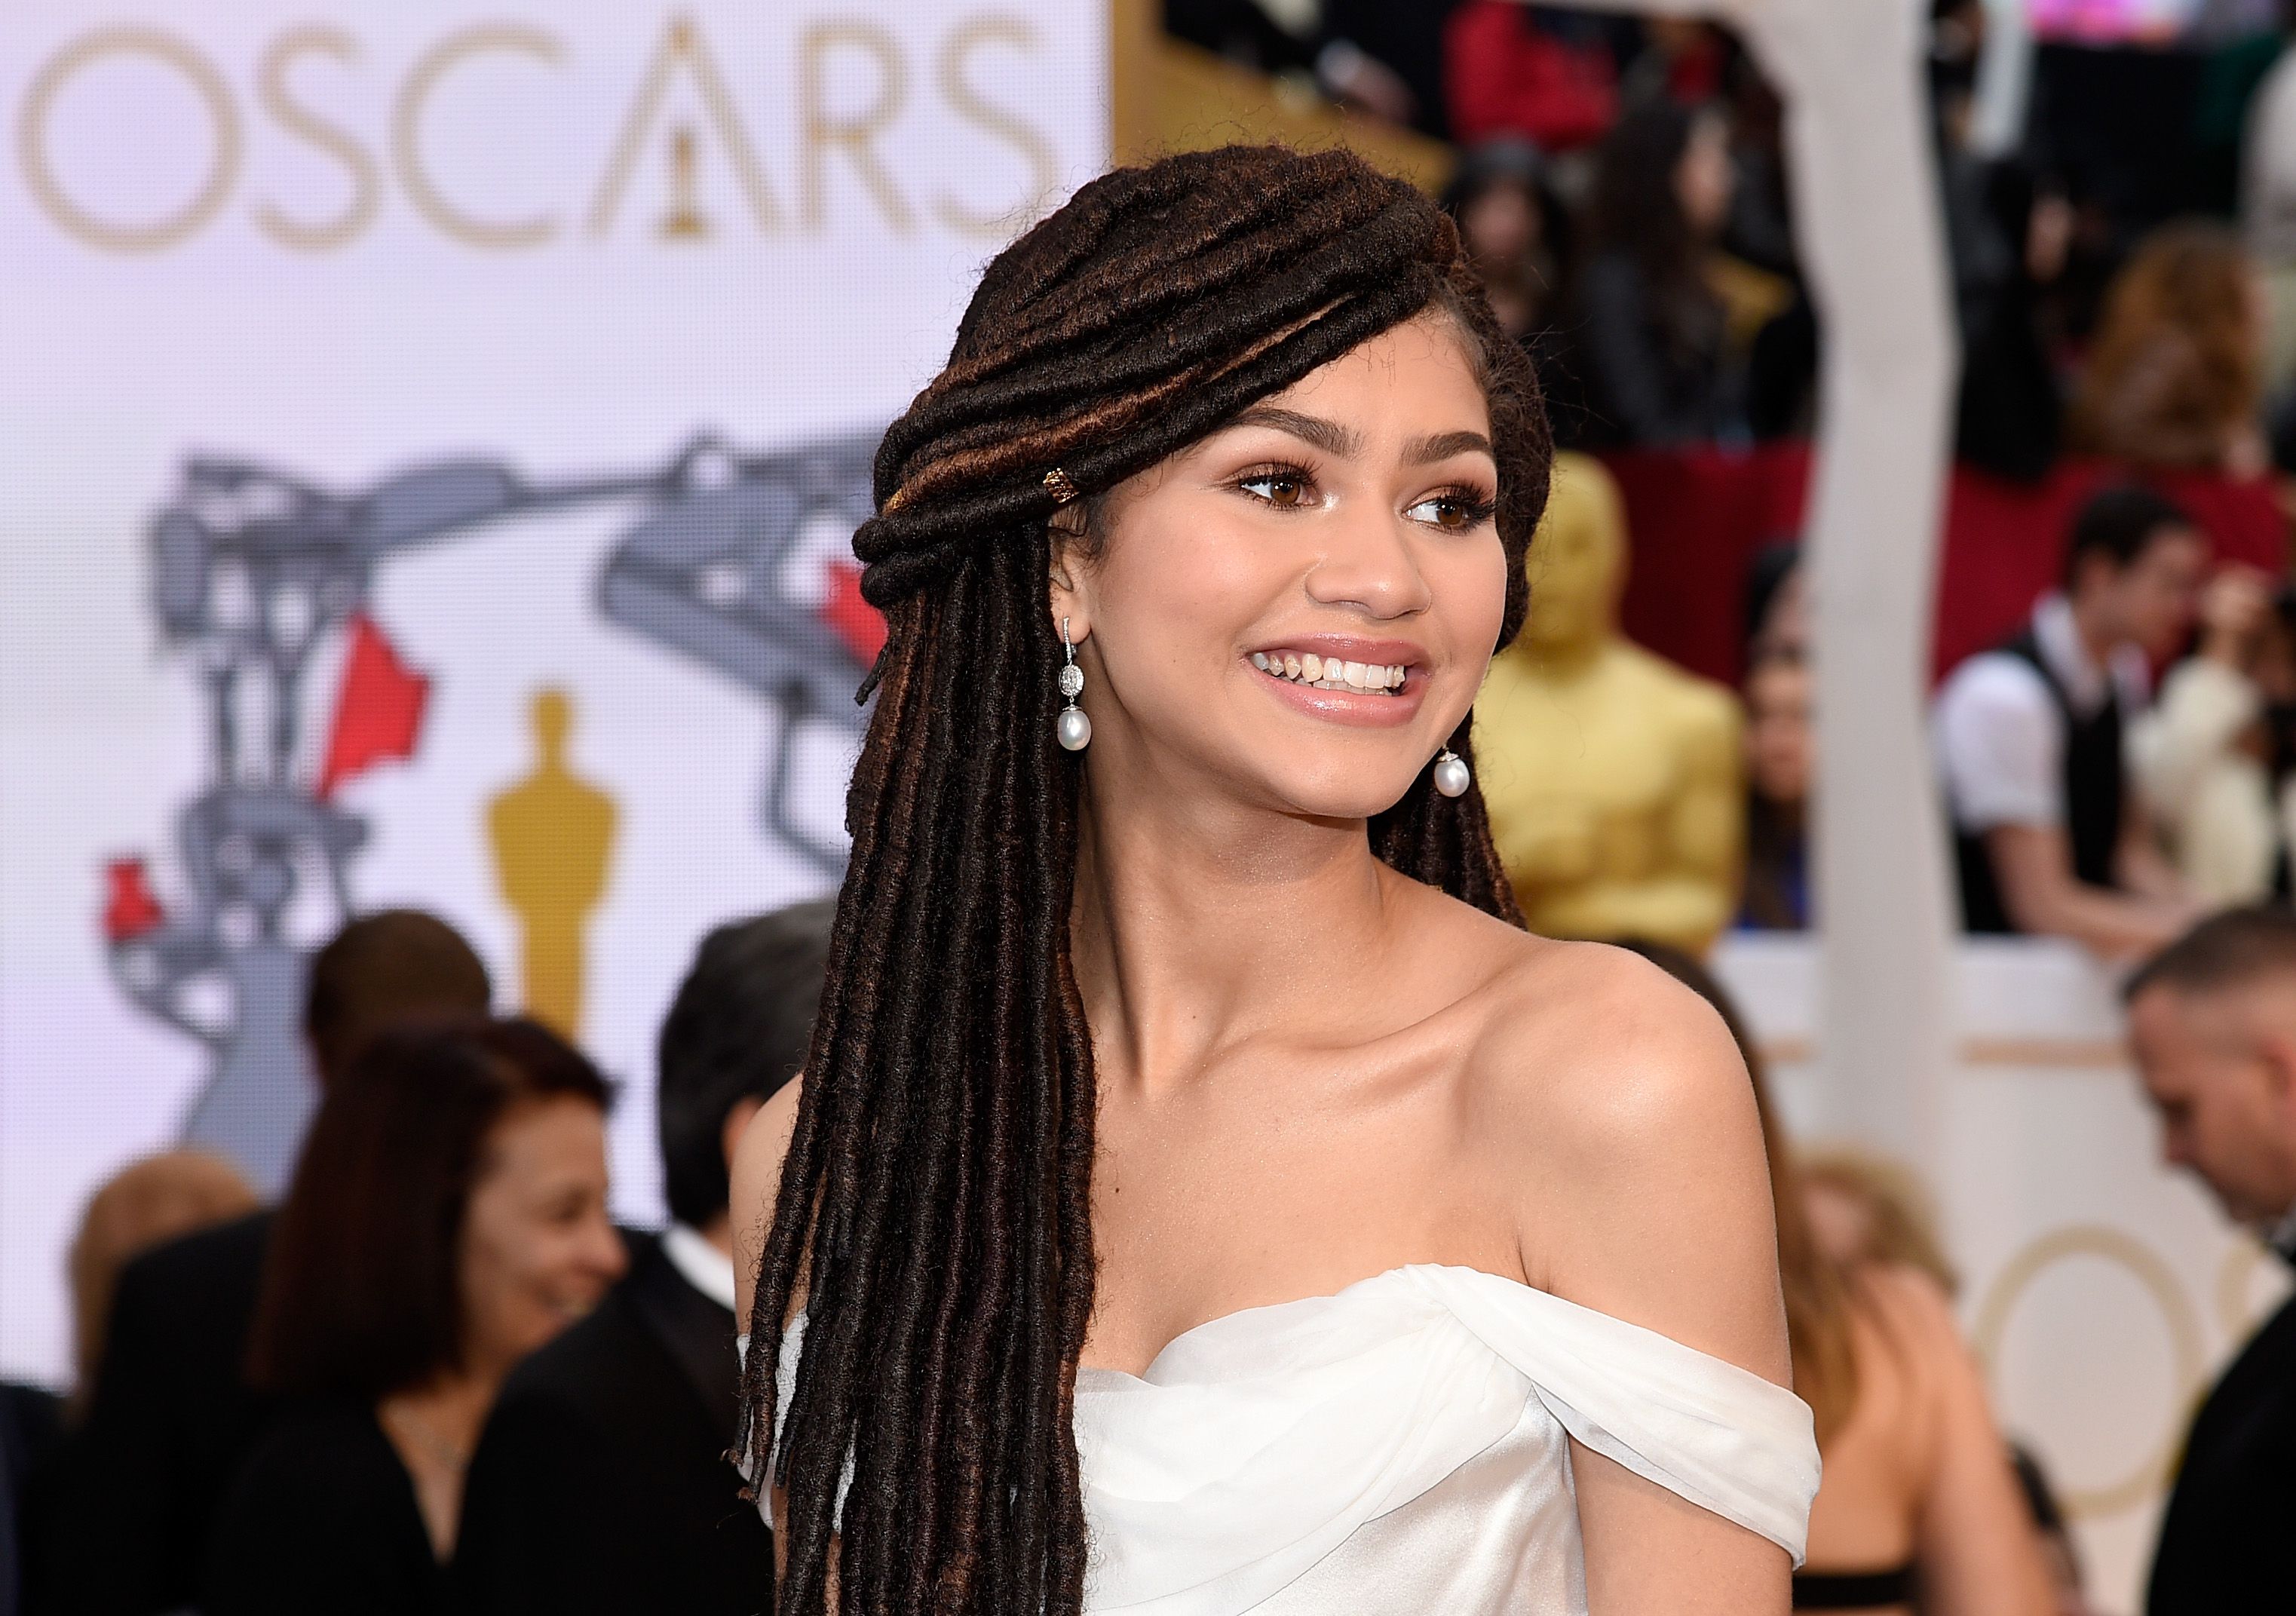 Zendaya attends the 87th Annual Academy Awards at Hollywood & Highland Center on February 22, 2015 in Hollywood, California. | Photo: Getty Images.